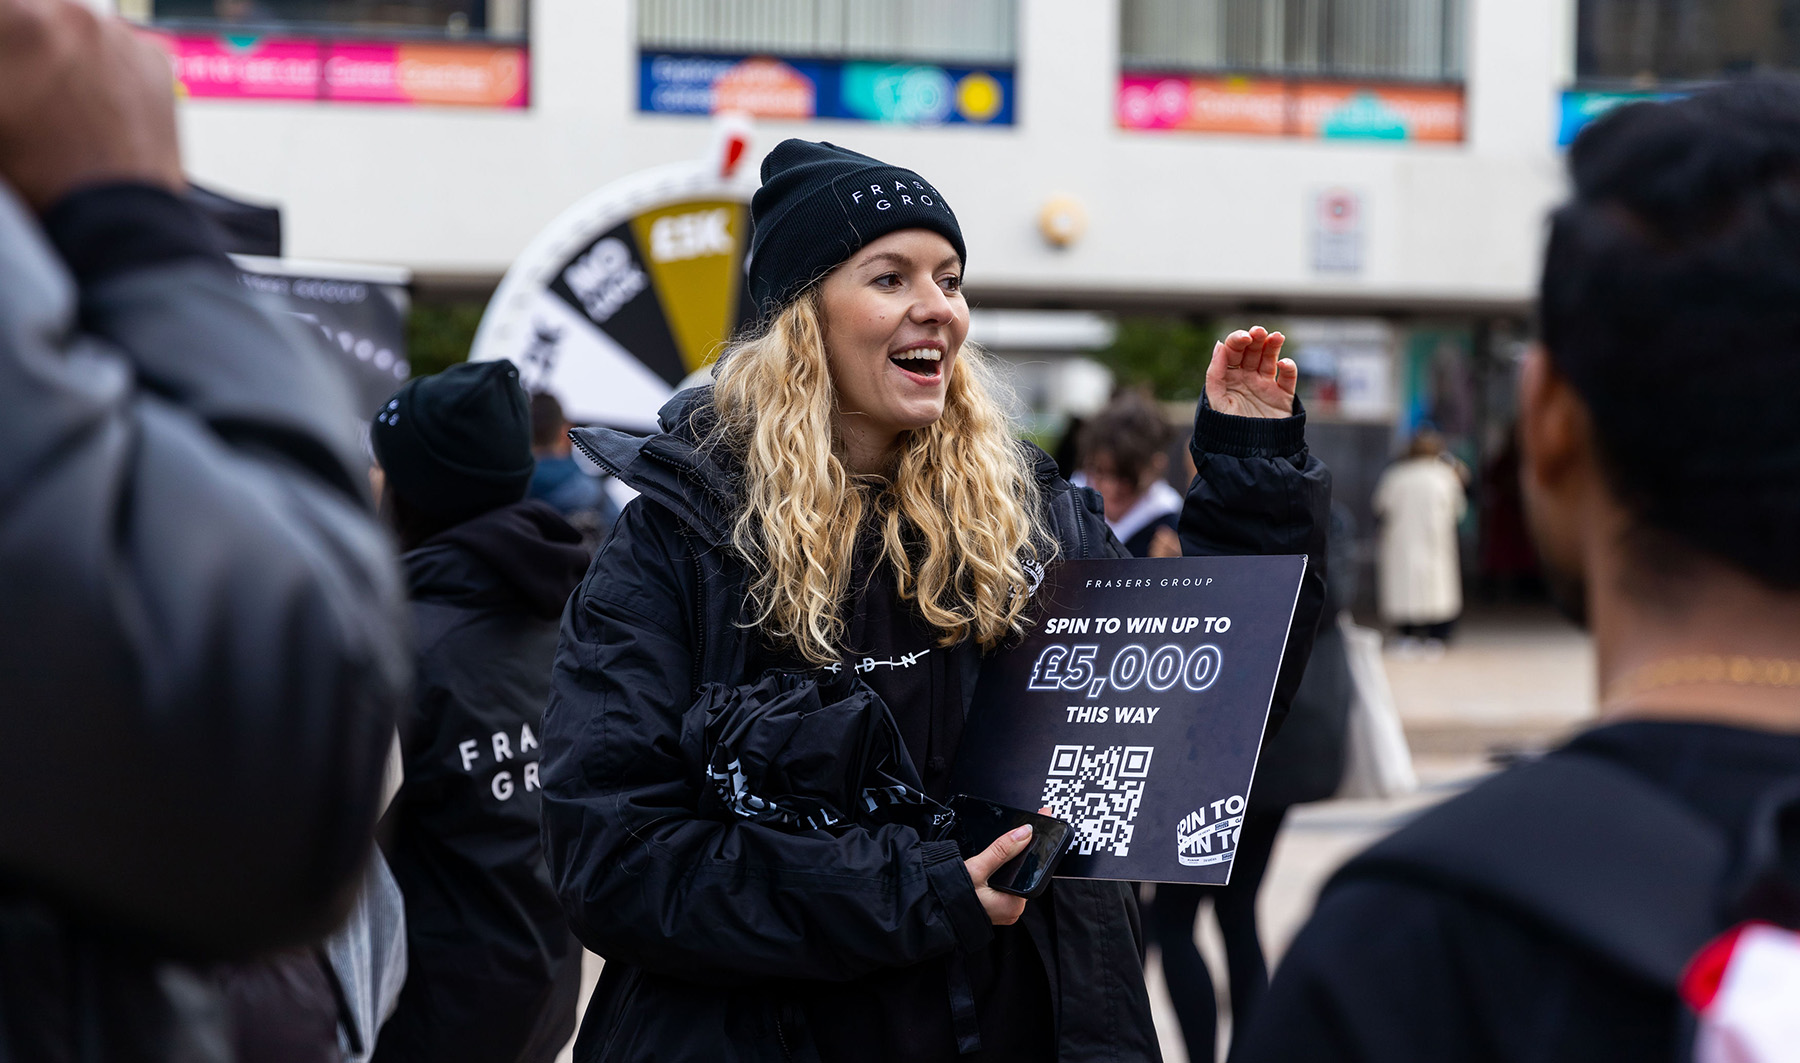 Photo of a blonde woman with curly hair promoting Frasers Group on campus